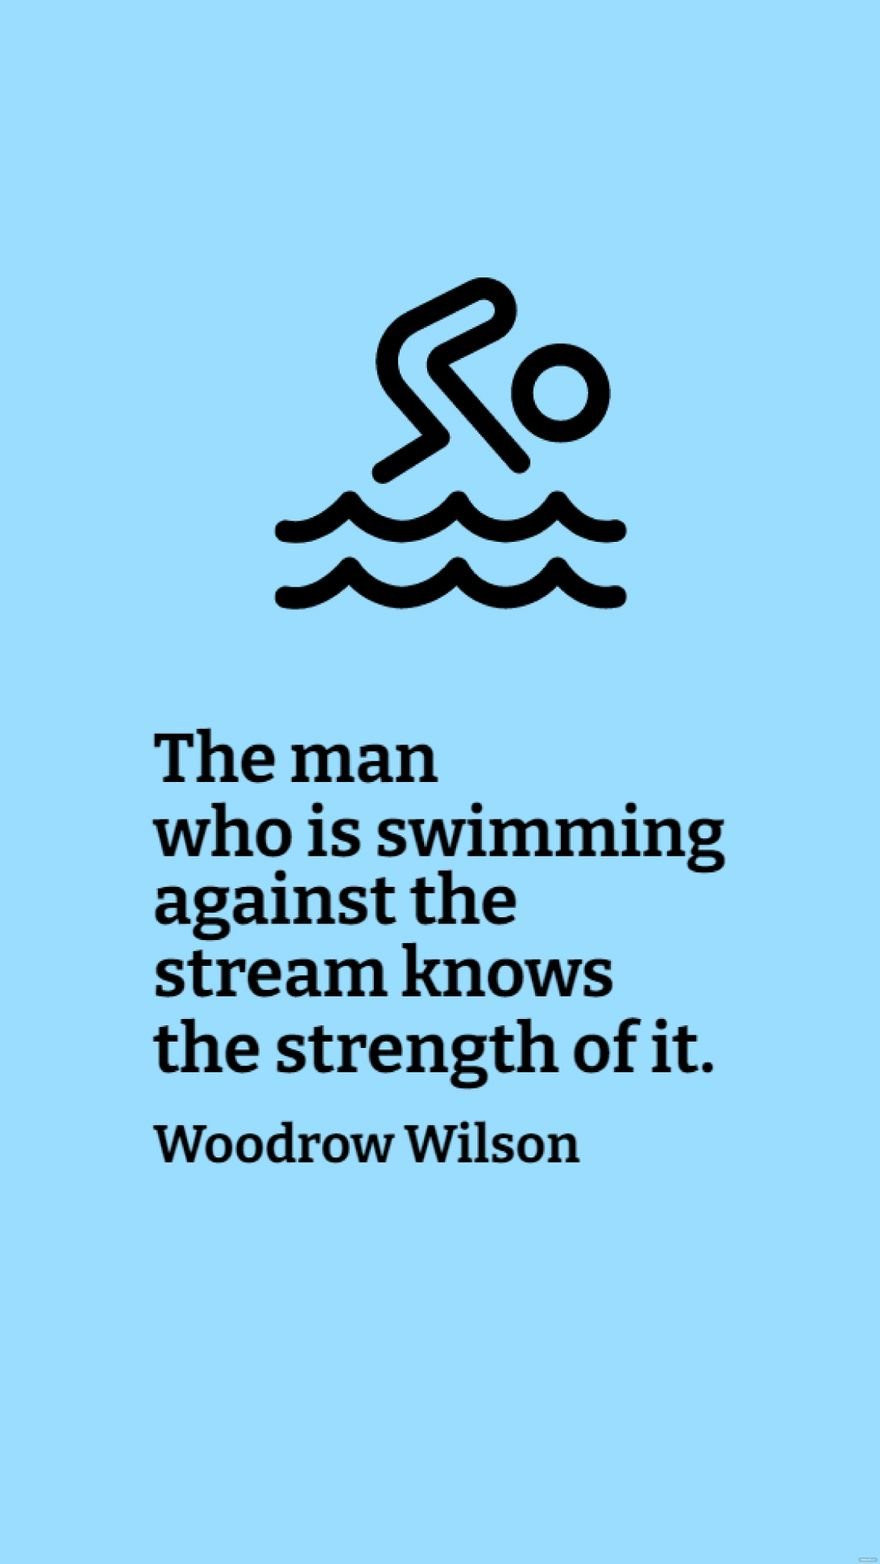 Woodrow Wilson - The man who is swimming against the stream knows the strength of it. in JPG